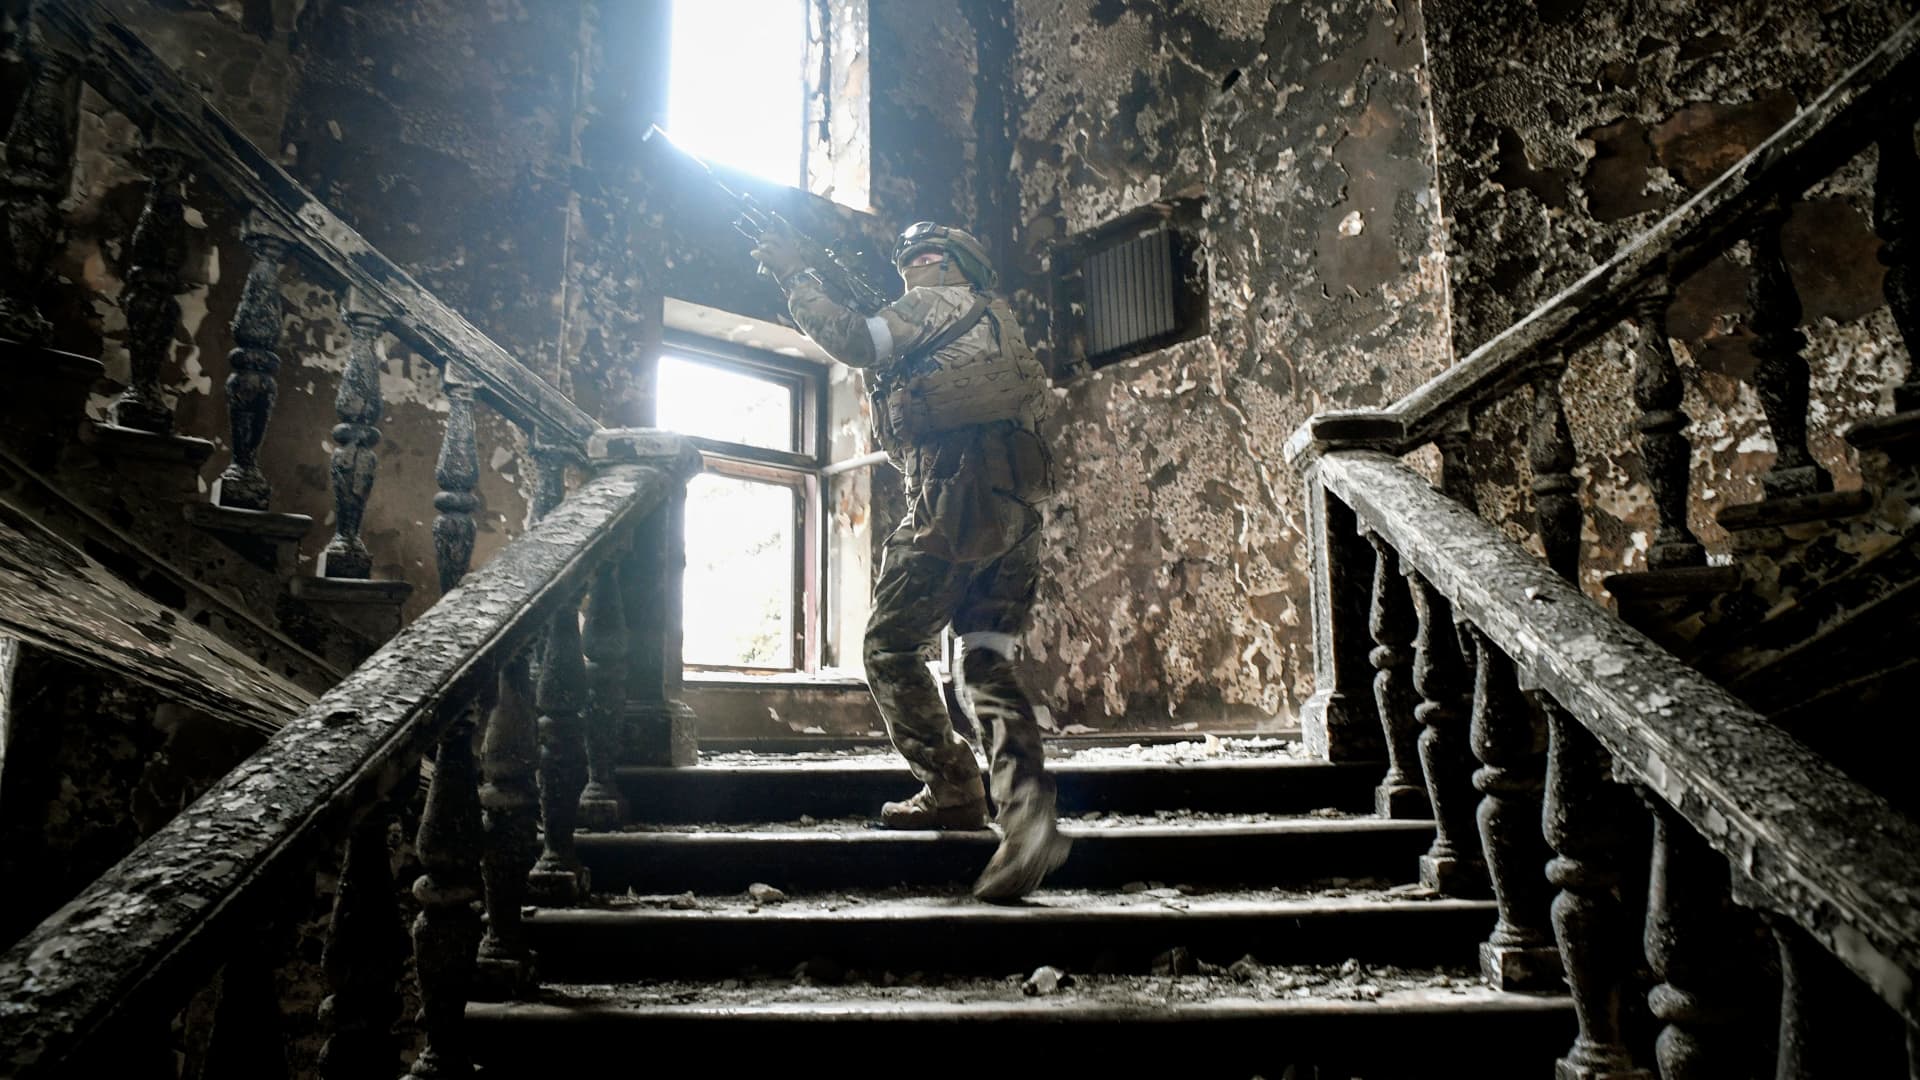 A Russian soldier patrols the Mariupol Drama Theatre, which was hit March 16 by an airstrike, on April 12, 2022 in Mariupol. Editor's note: This picture was taken during a trip organized by the Russian military.